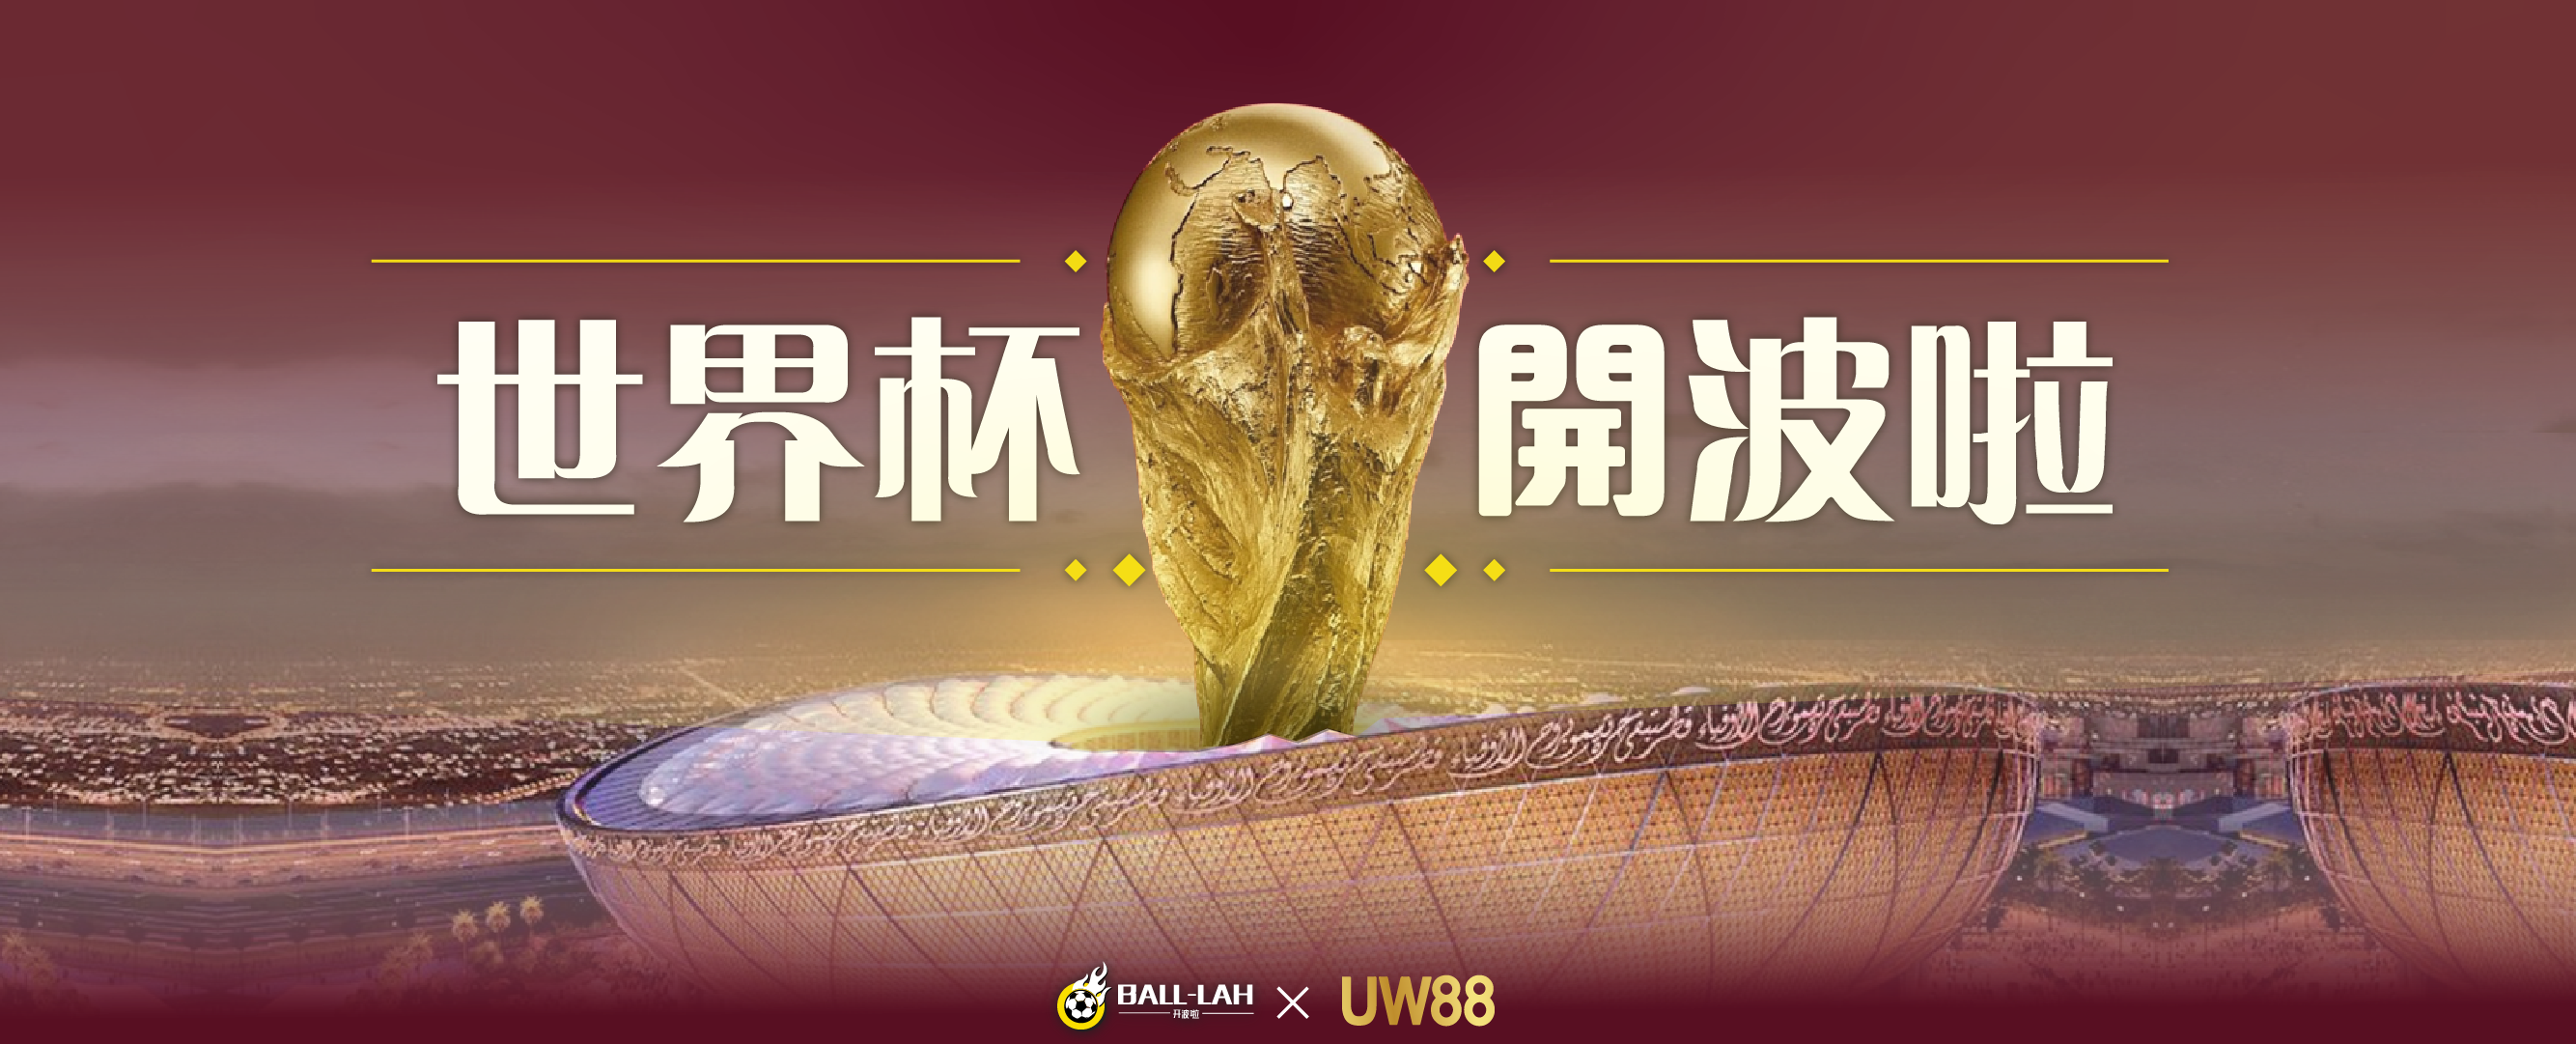 event fifa banner